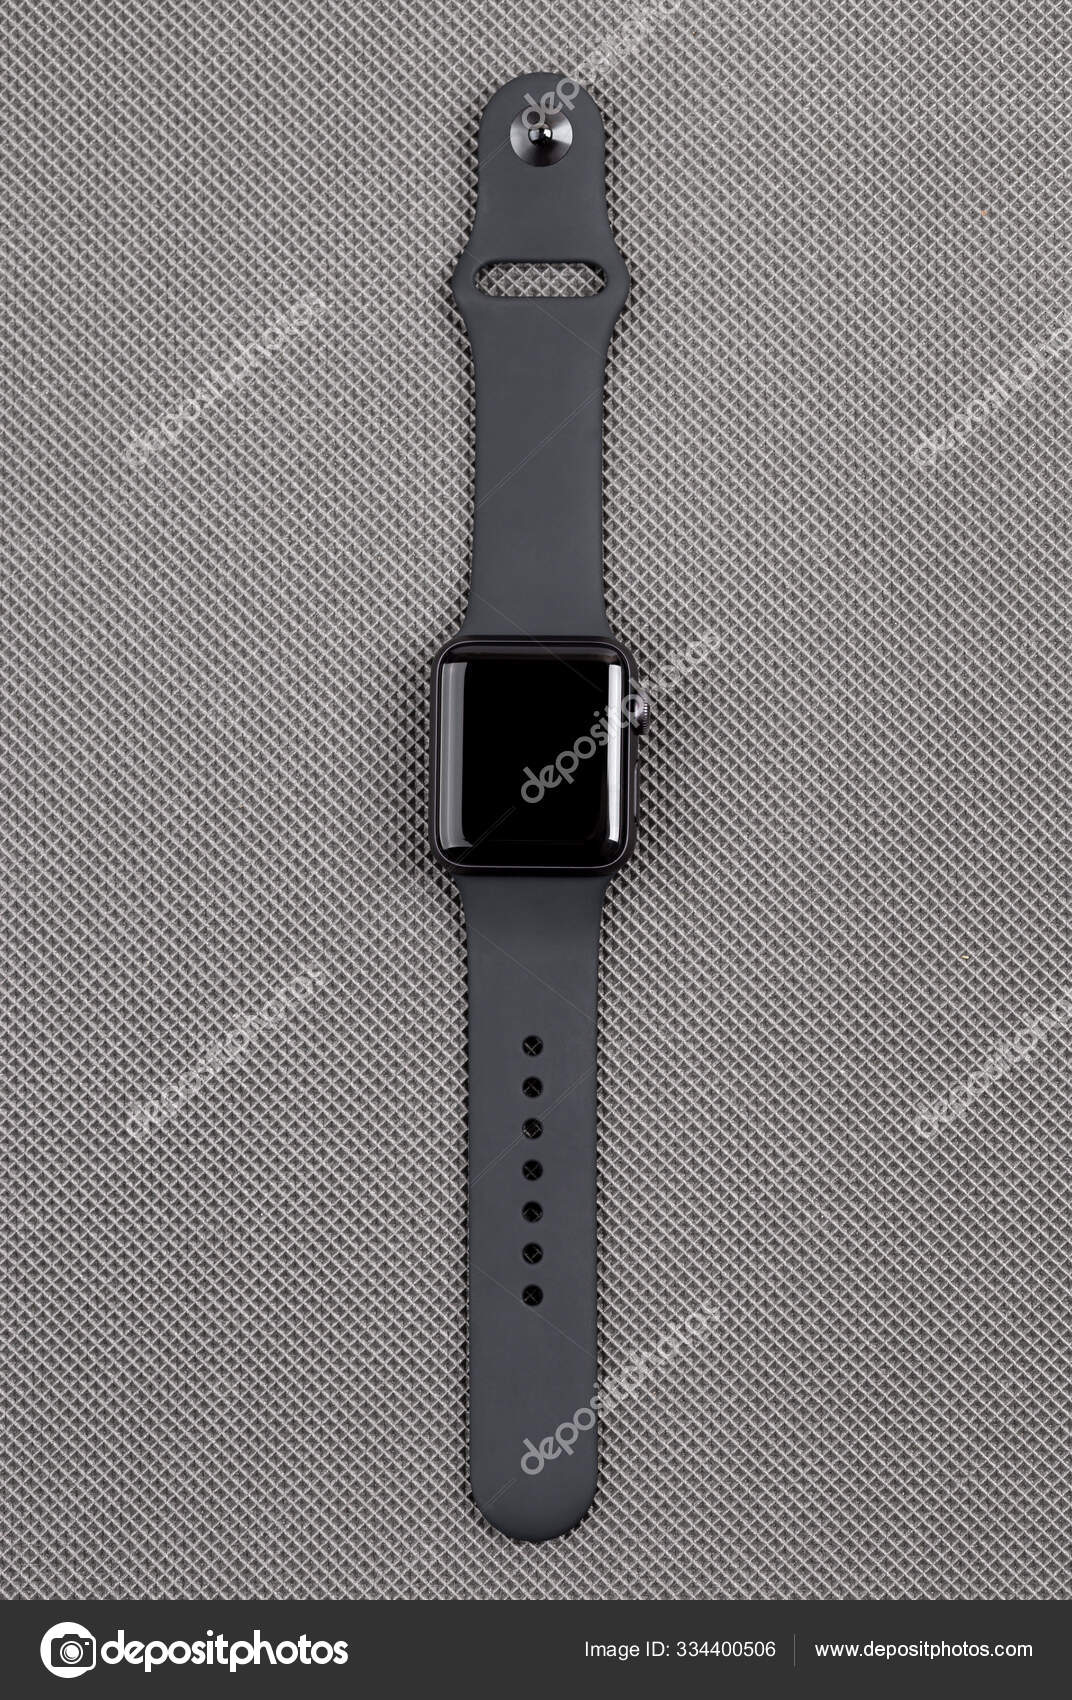 Apple Watch Series 5 Space Gray Alal Case With Sport Band Black Color 图库社论照片 C Seremin